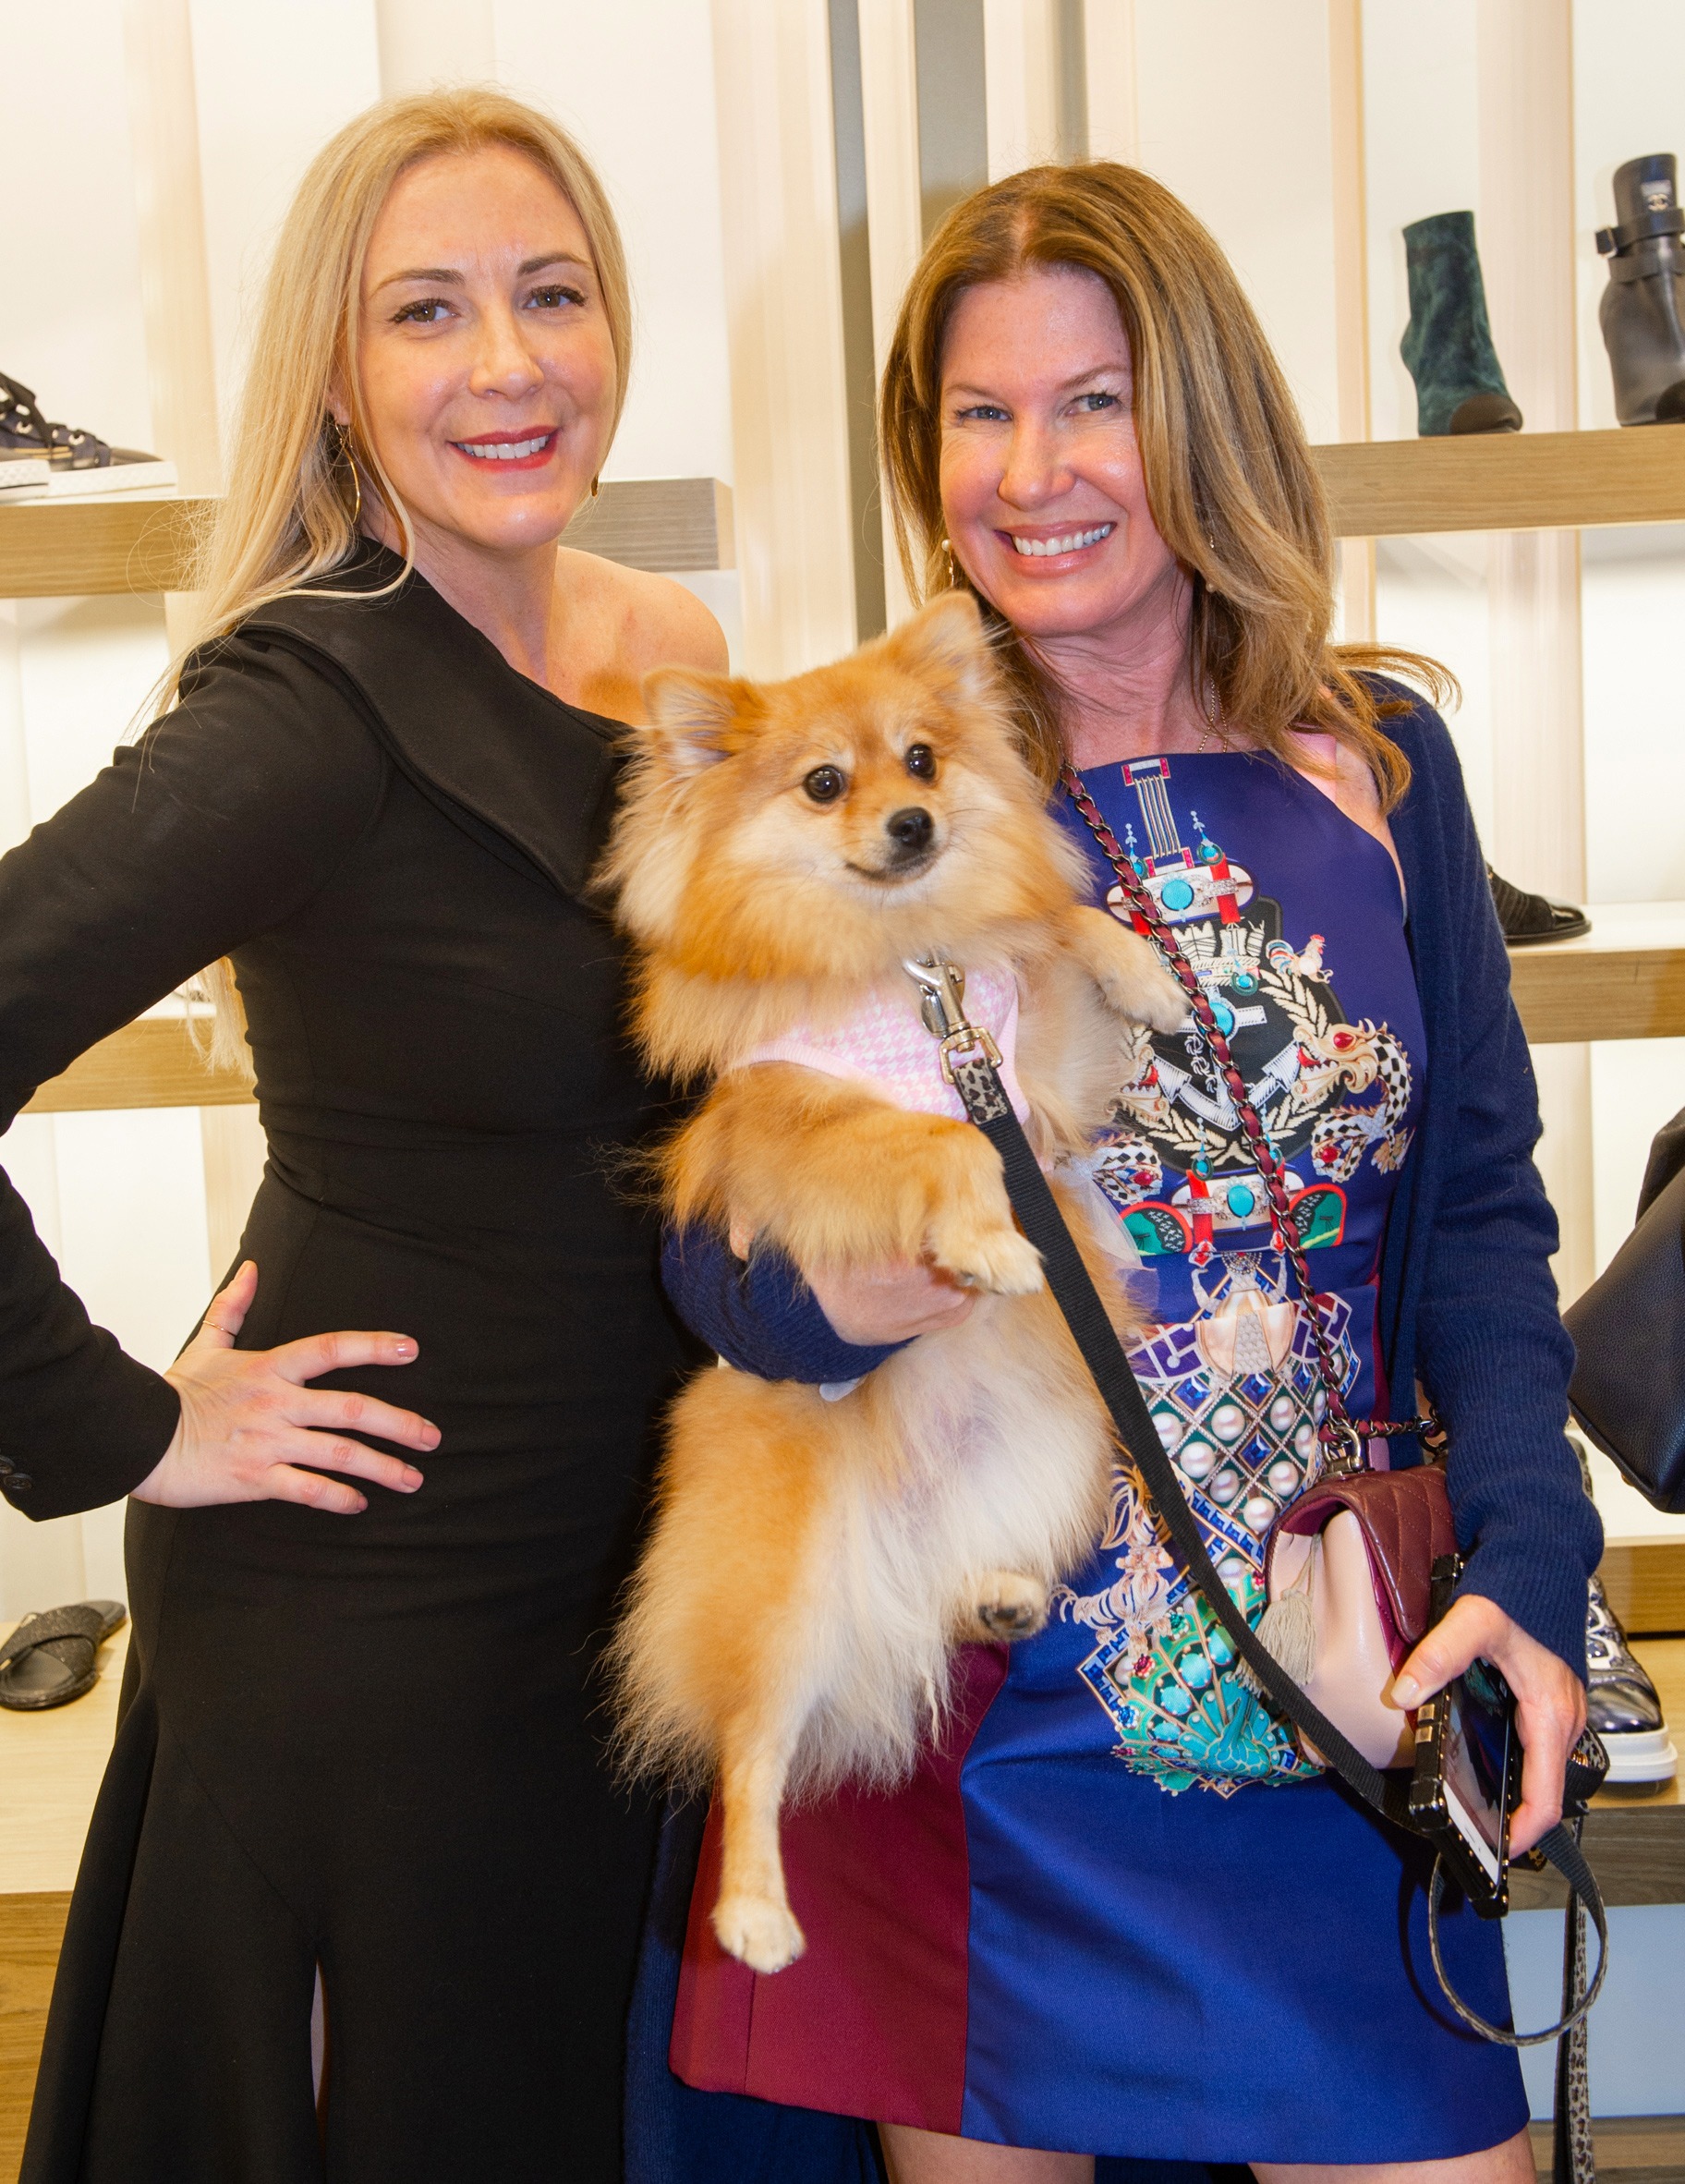 Founder of Walk In Style For The Animals, Angela Birdman and guest Dana Shear enjoying their shopping time inside Neiman Marcus Bal Harbour.